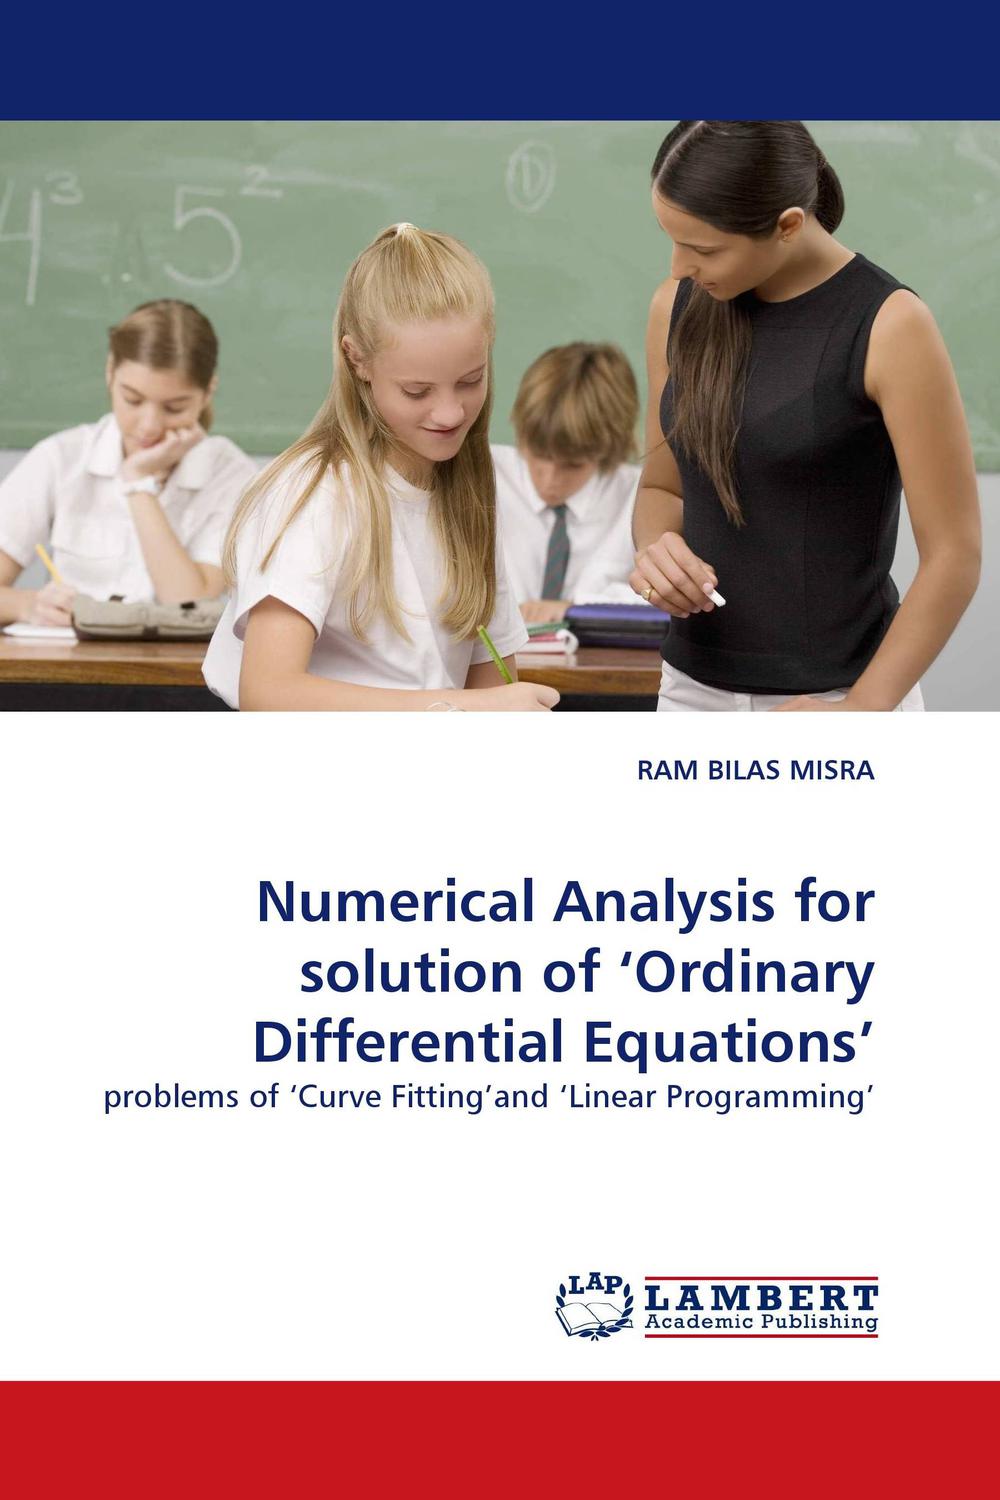 Numerical Analysis for solution of 'Ordinary Differential Equations'' - RAM BILAS MISRA,,